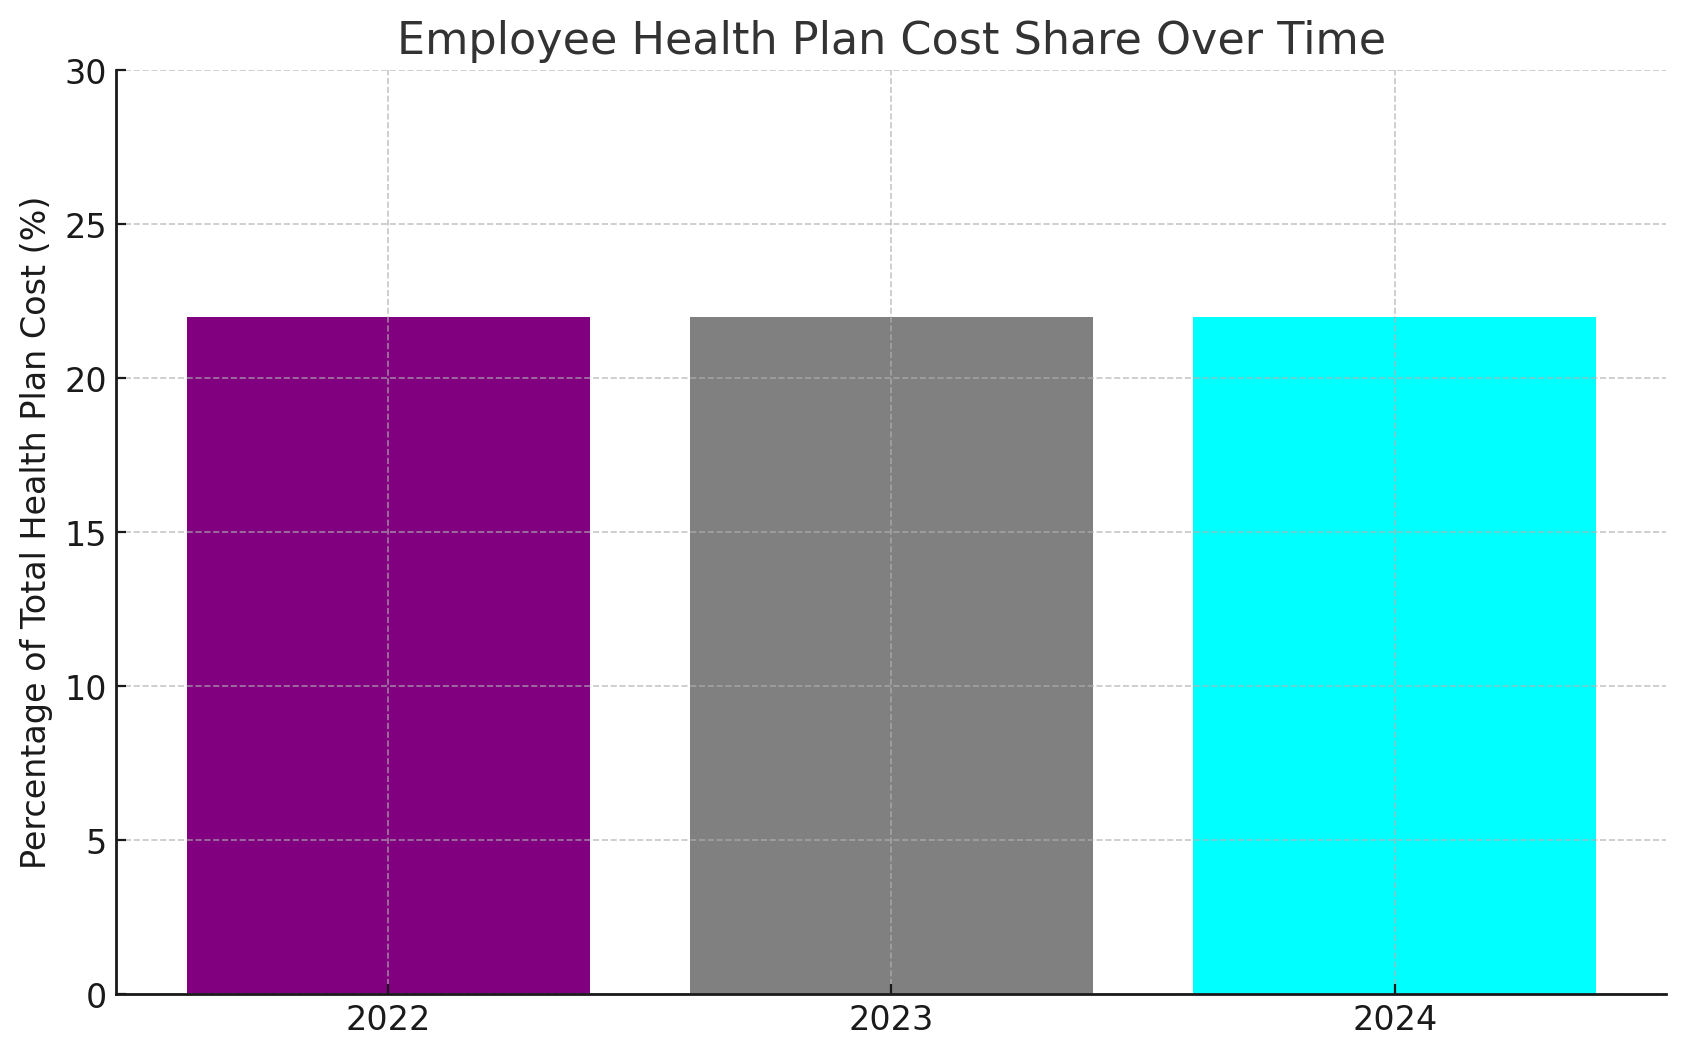 Heatlth Pland Cost from 2022 to 2024